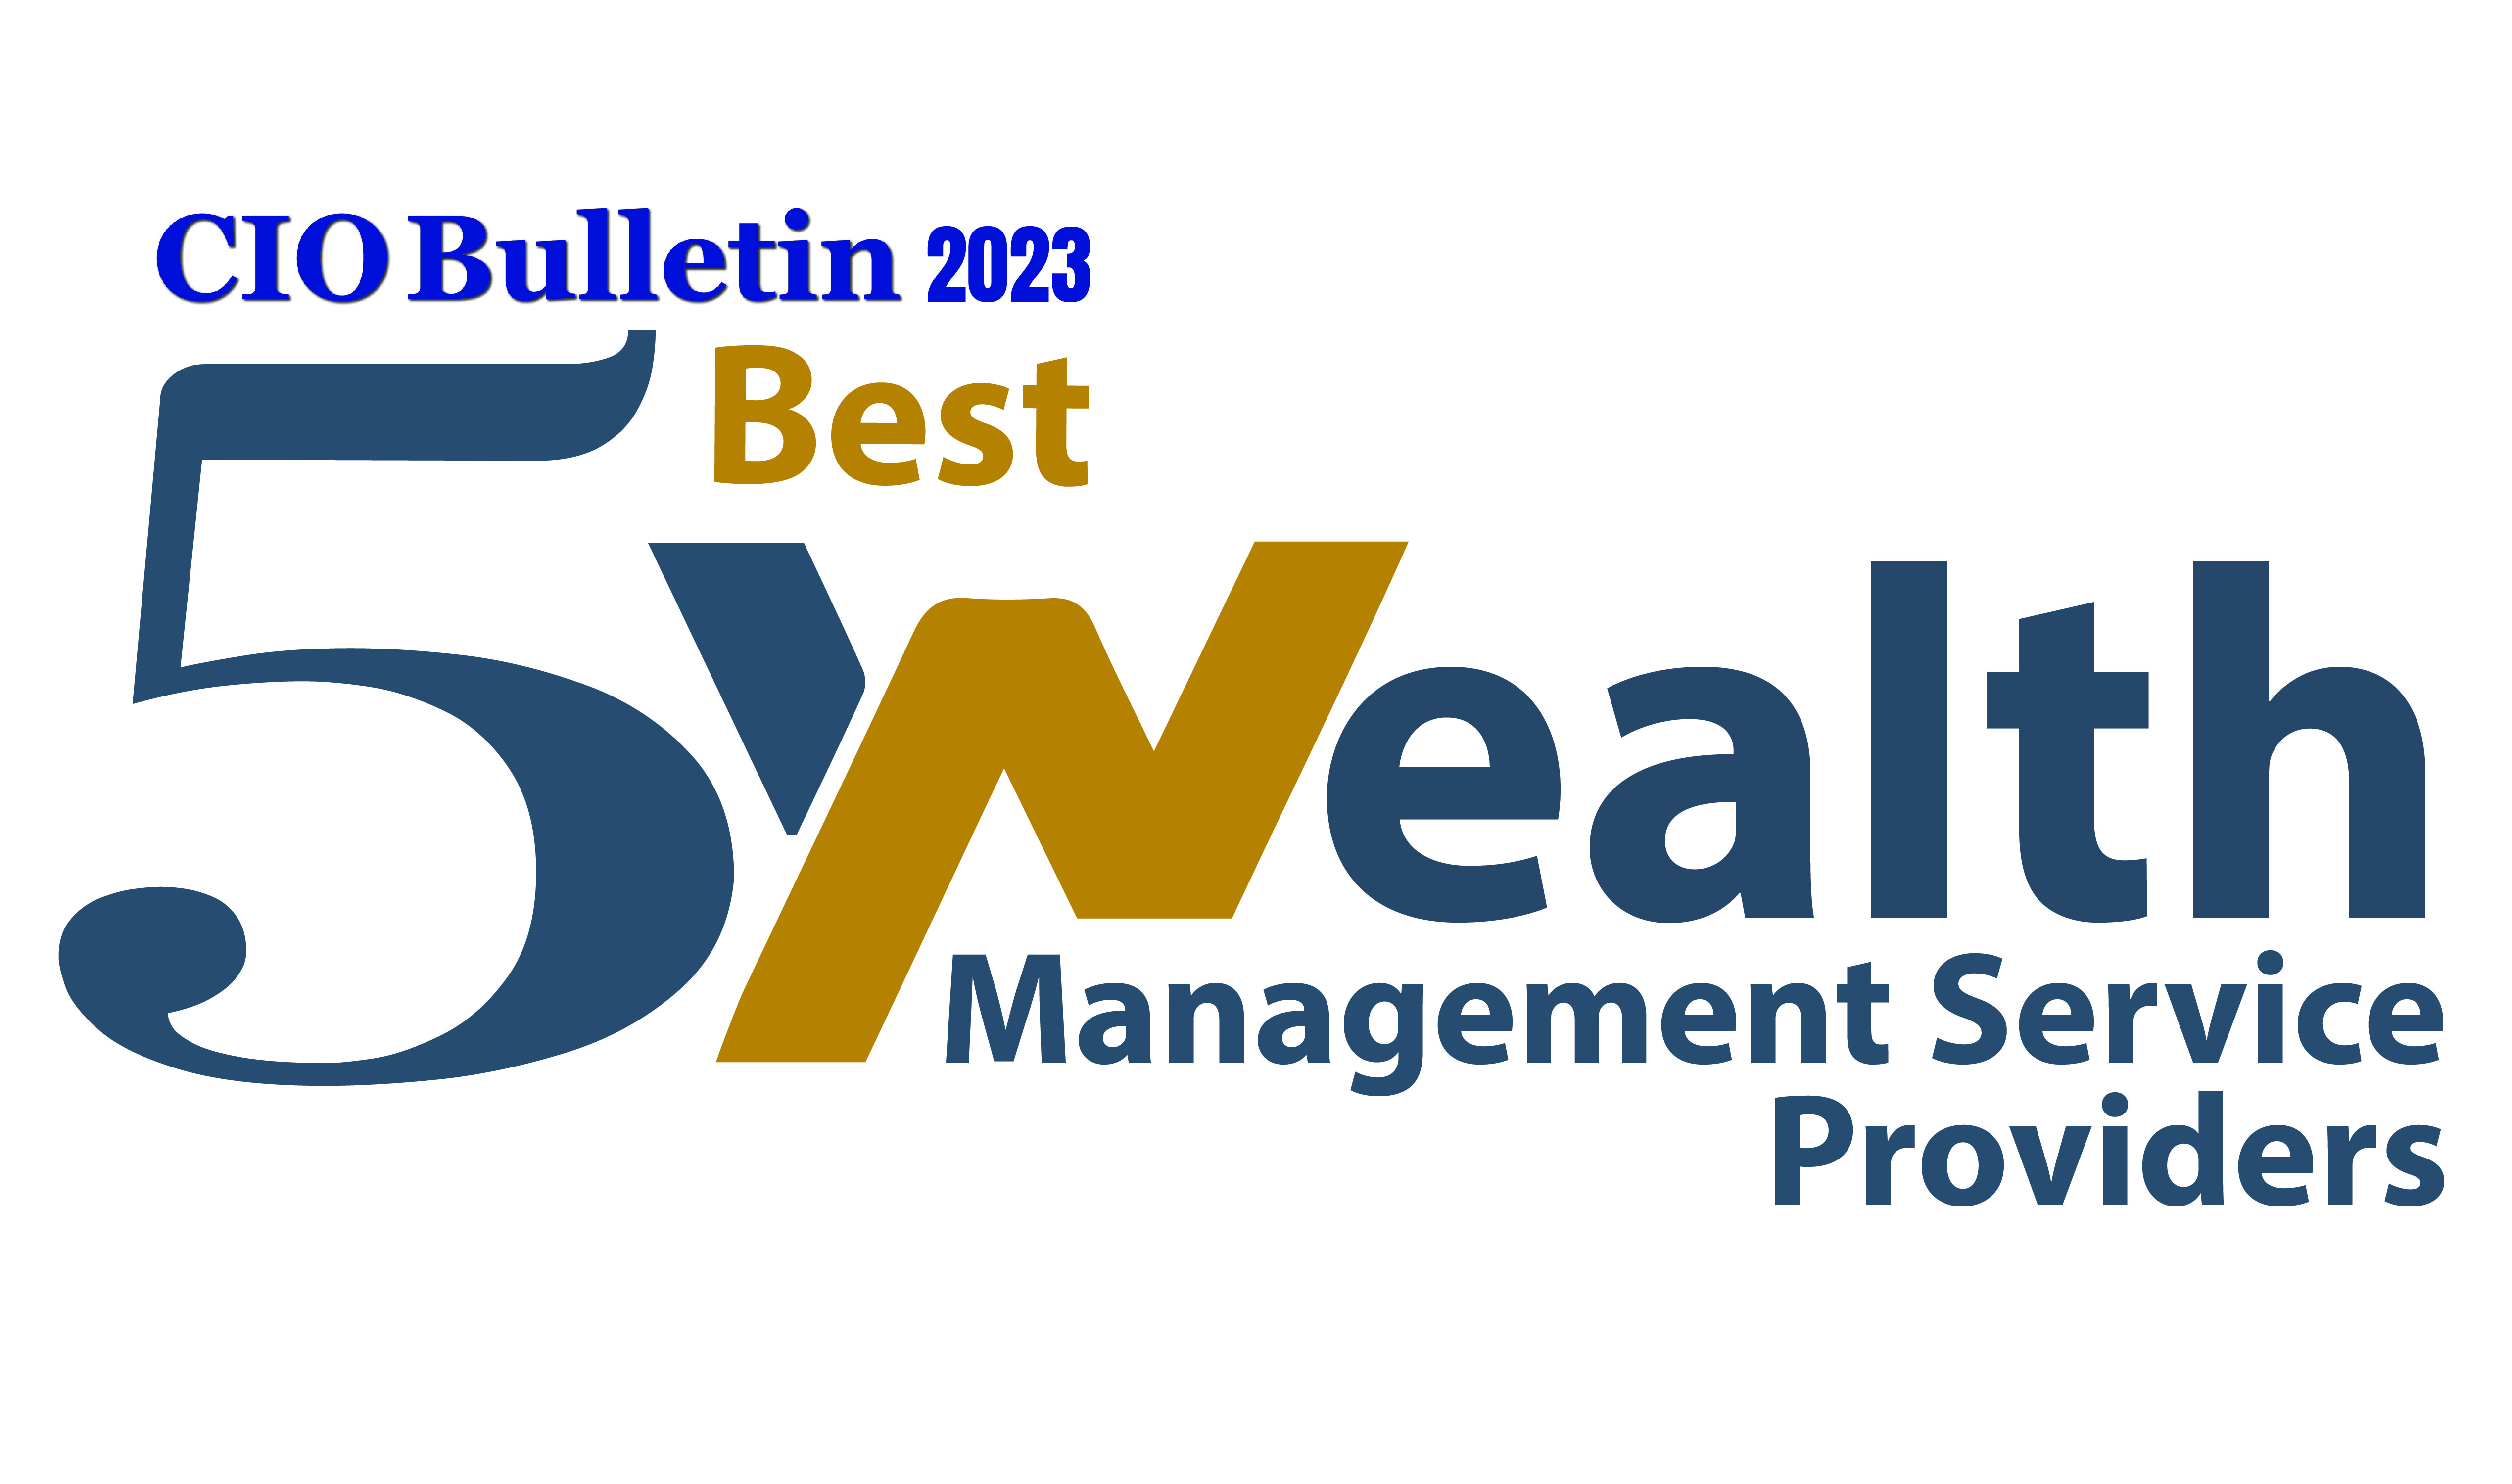 5 Best Wealth Management Service Providers 2023